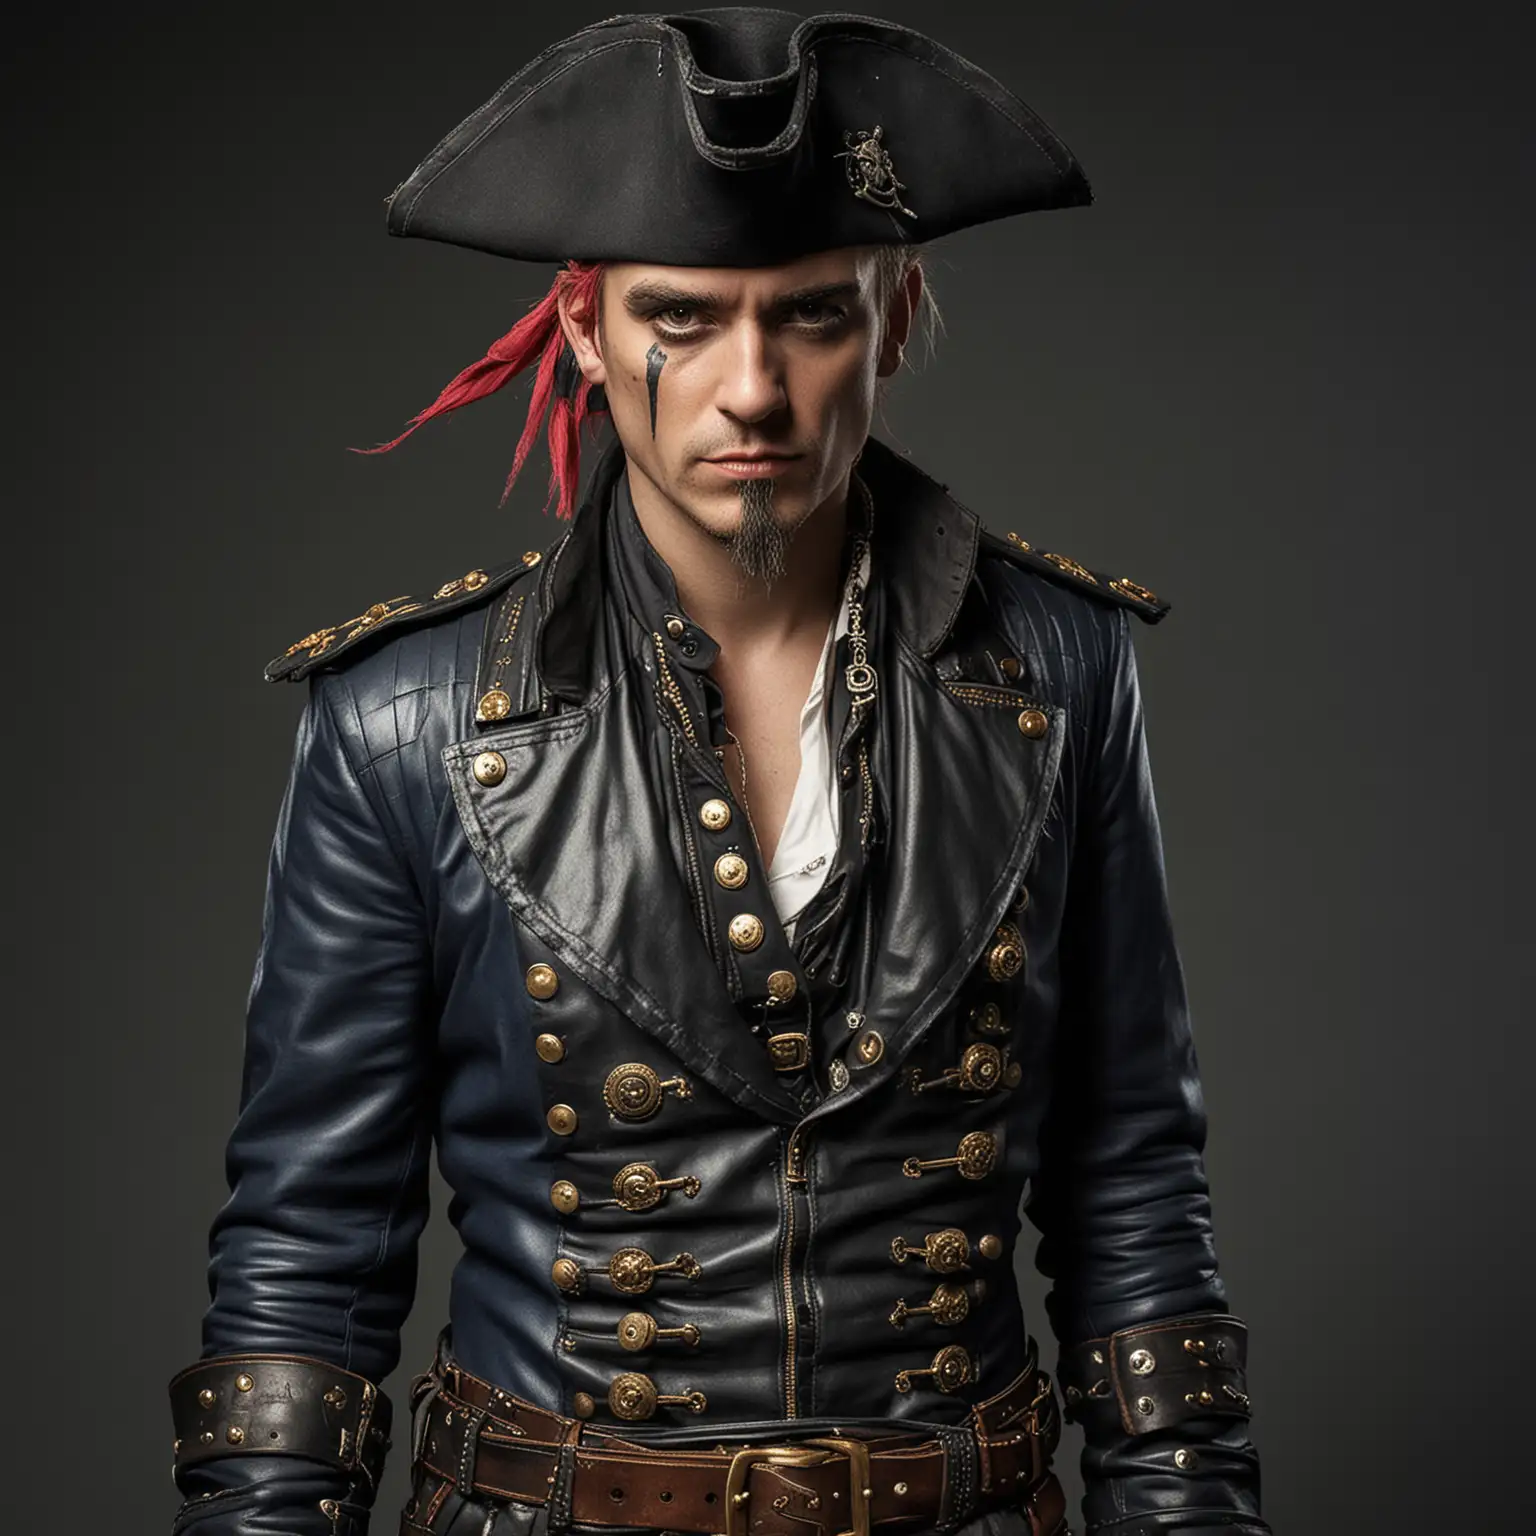 A punk pirate dressed in naval officer leathers